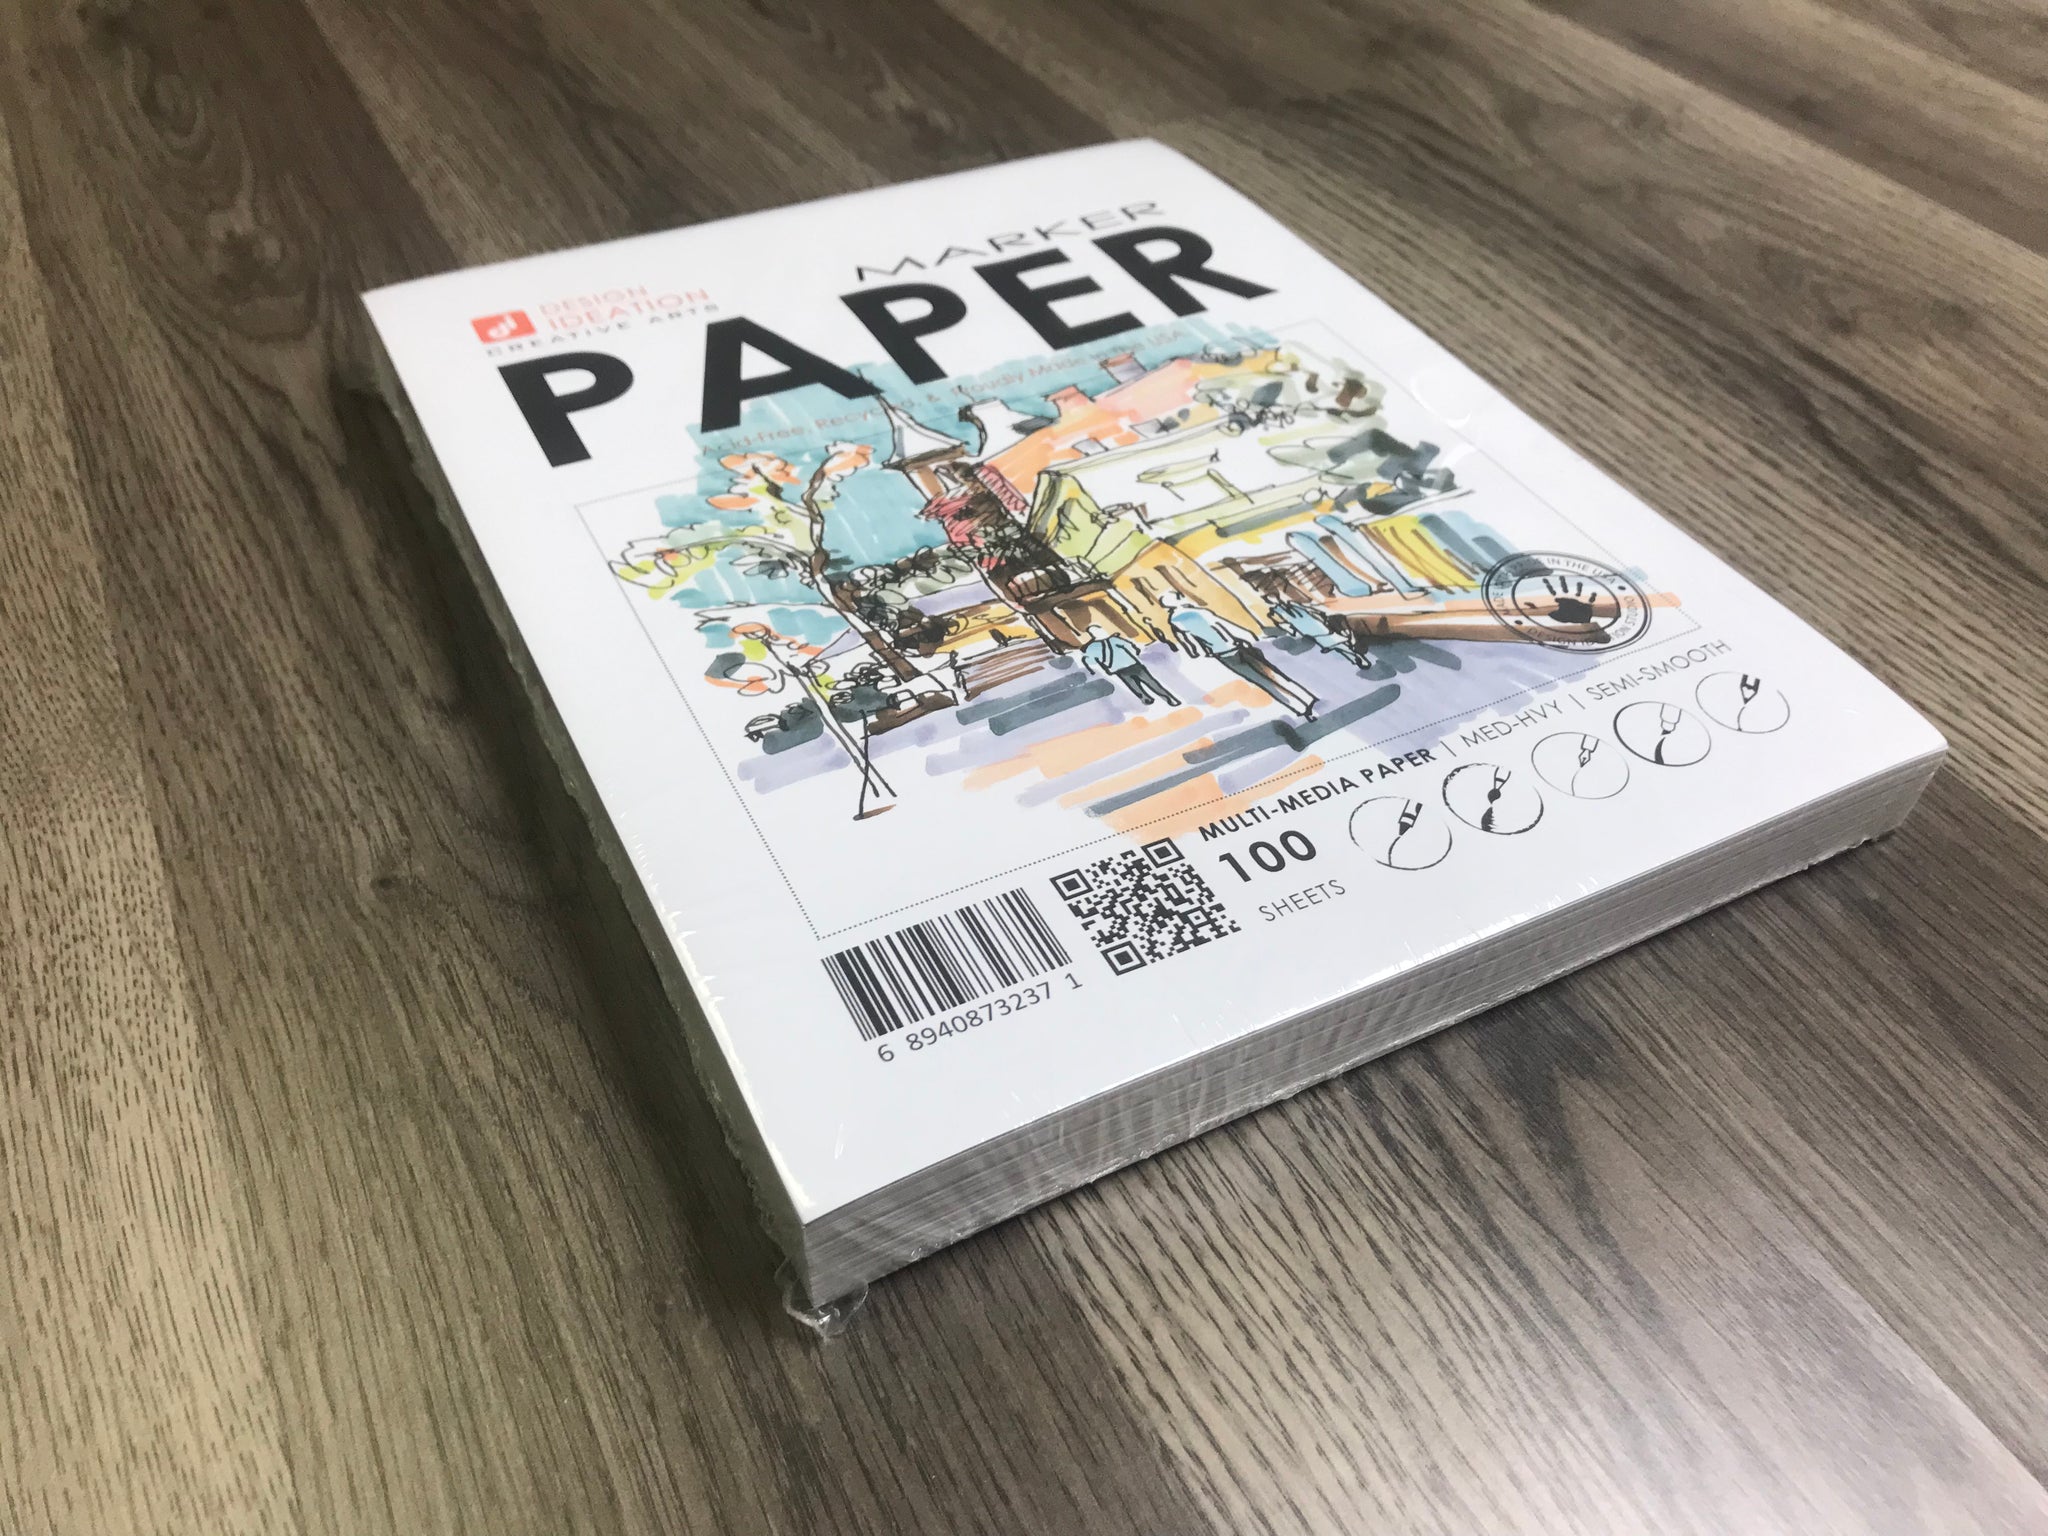 Best Paper for Markers –